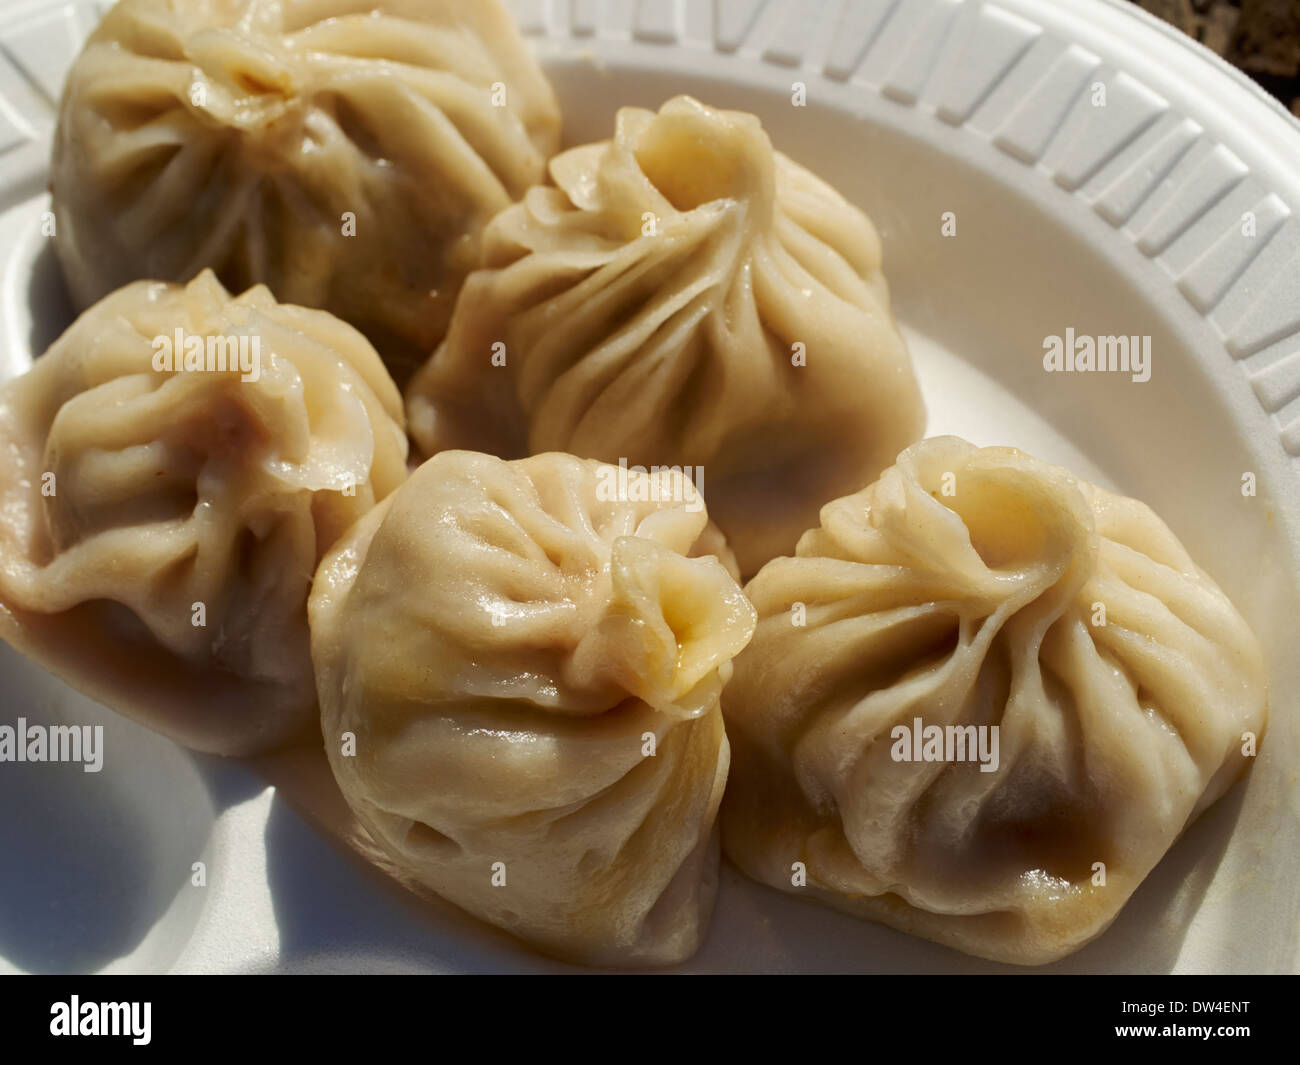 Tibetan steamed dumplings momo from a stand in Jackson Heights NY, USA Stock Photo